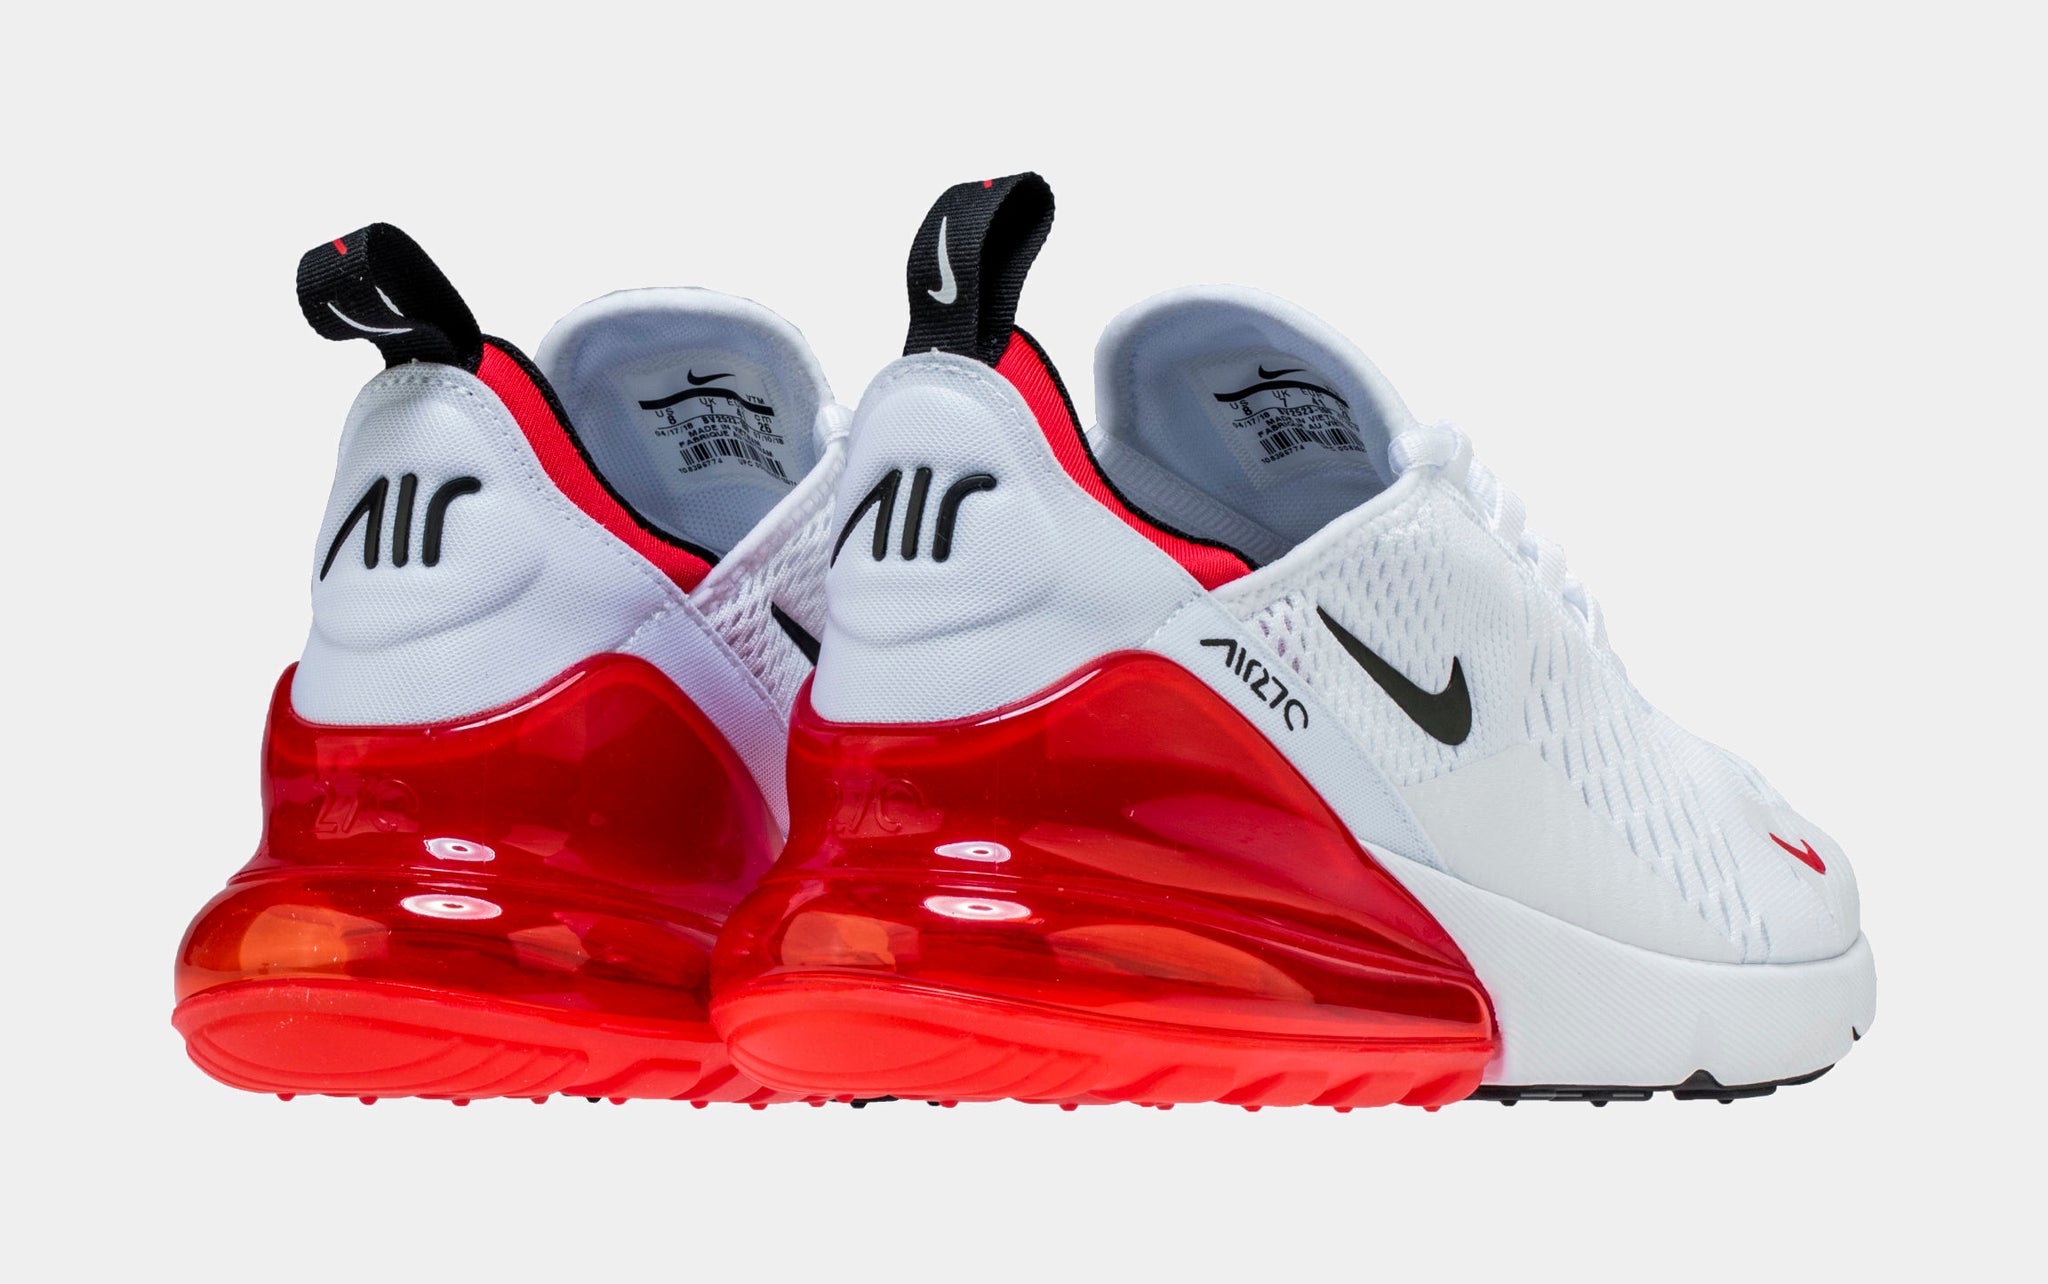 Air Max 270 University Red Mens Lifestyle Shoes (White/University Red)